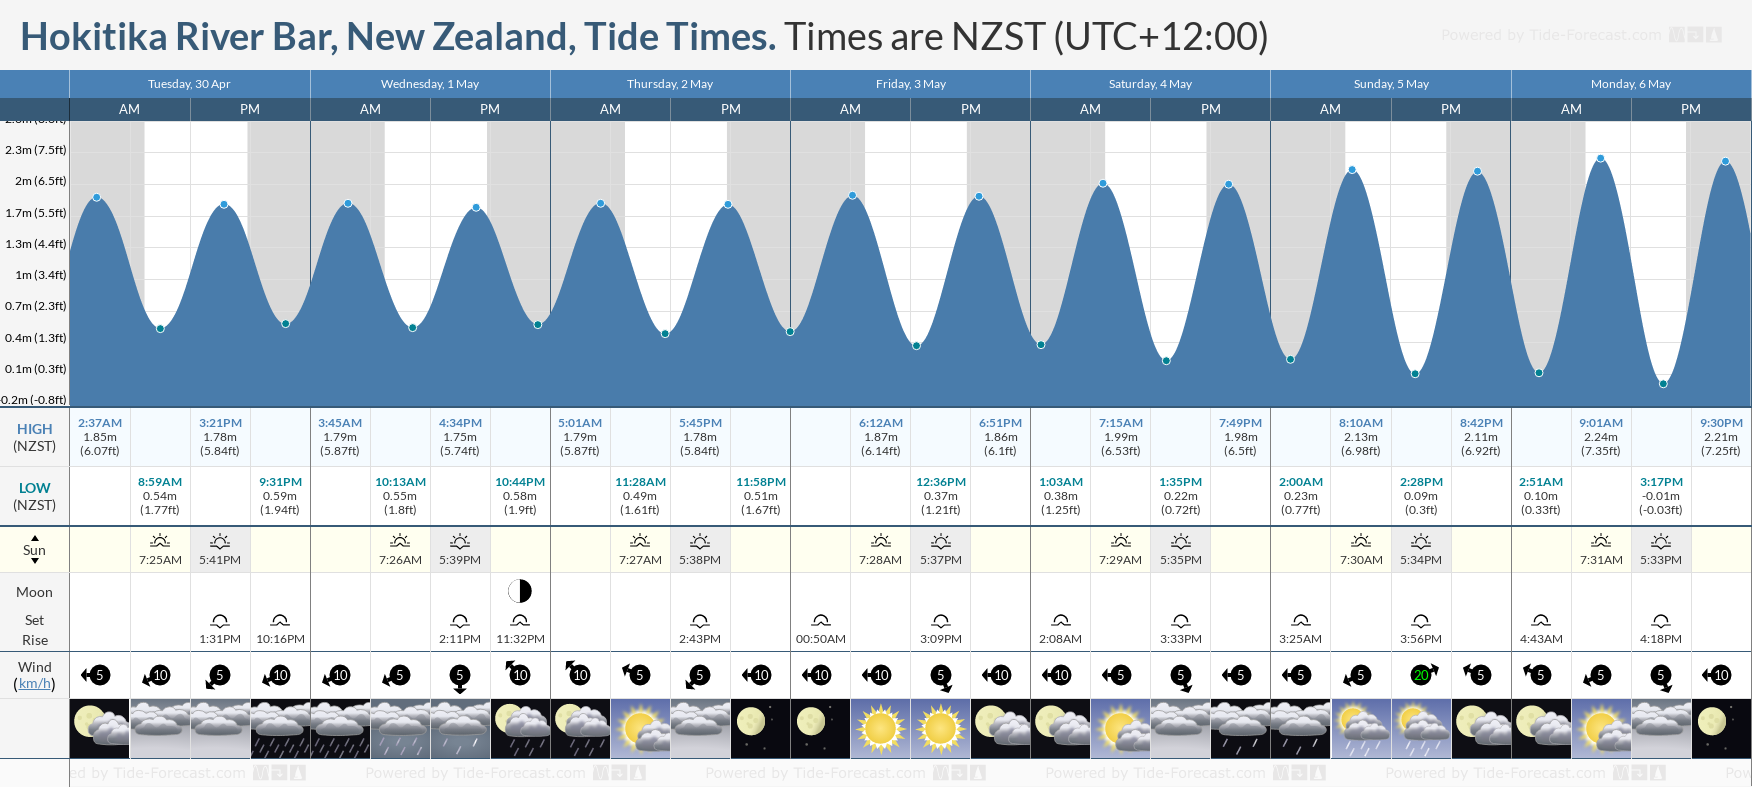 Hokitika River Bar, New Zealand Tide Chart including high and low tide times for the next 7 days